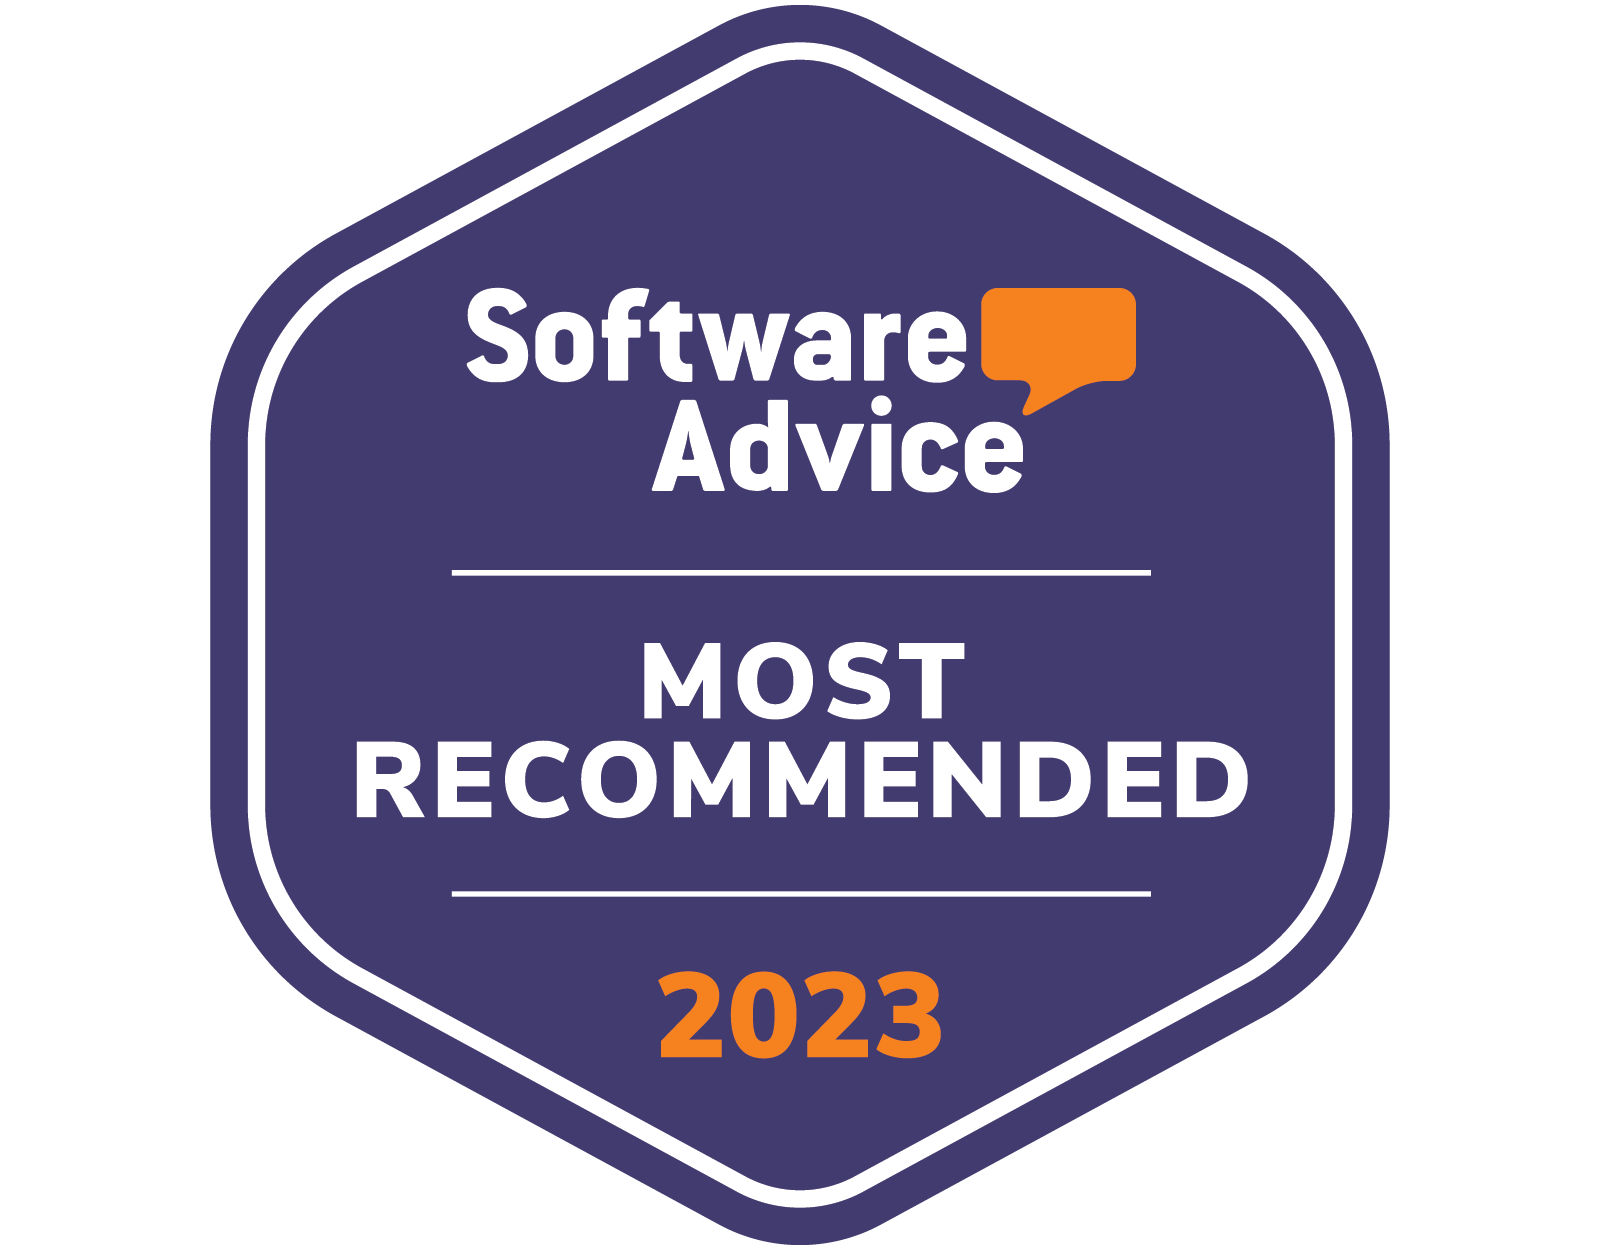 Jackrabbit Most Recommended Software Advice 2023